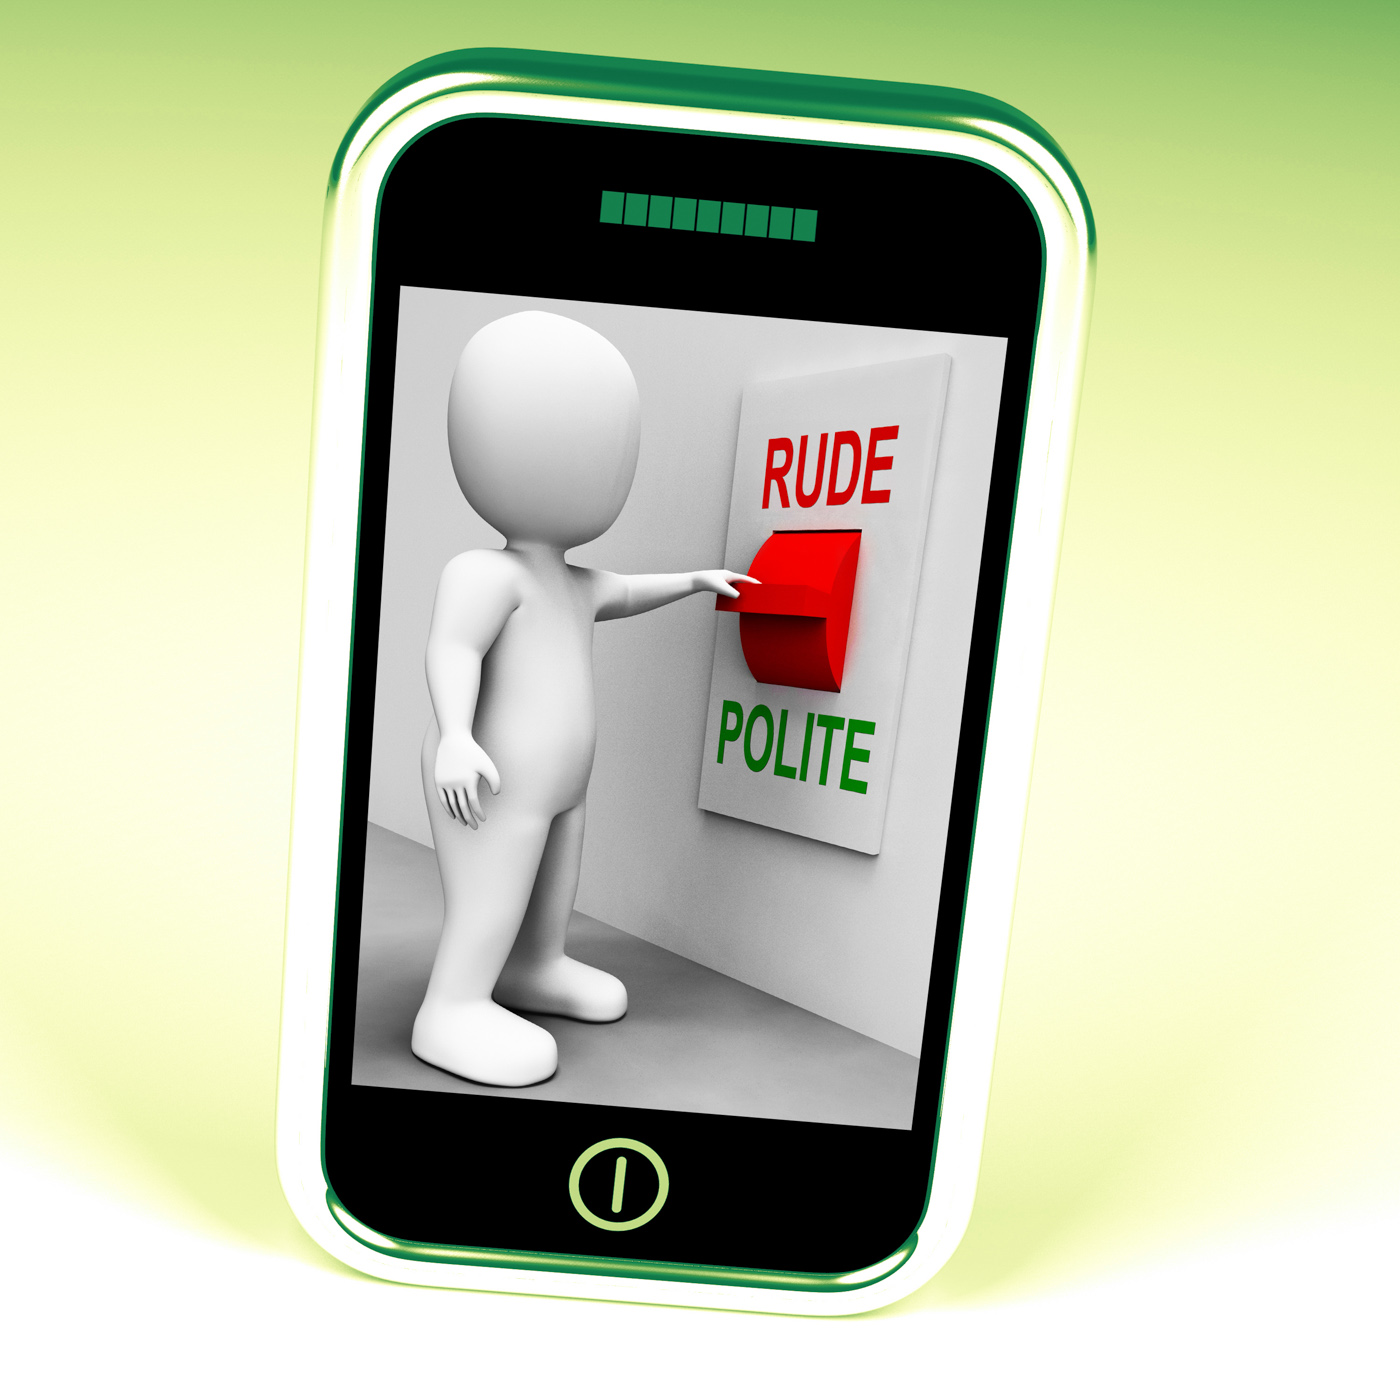 Rude polite switch means good bad manners photo